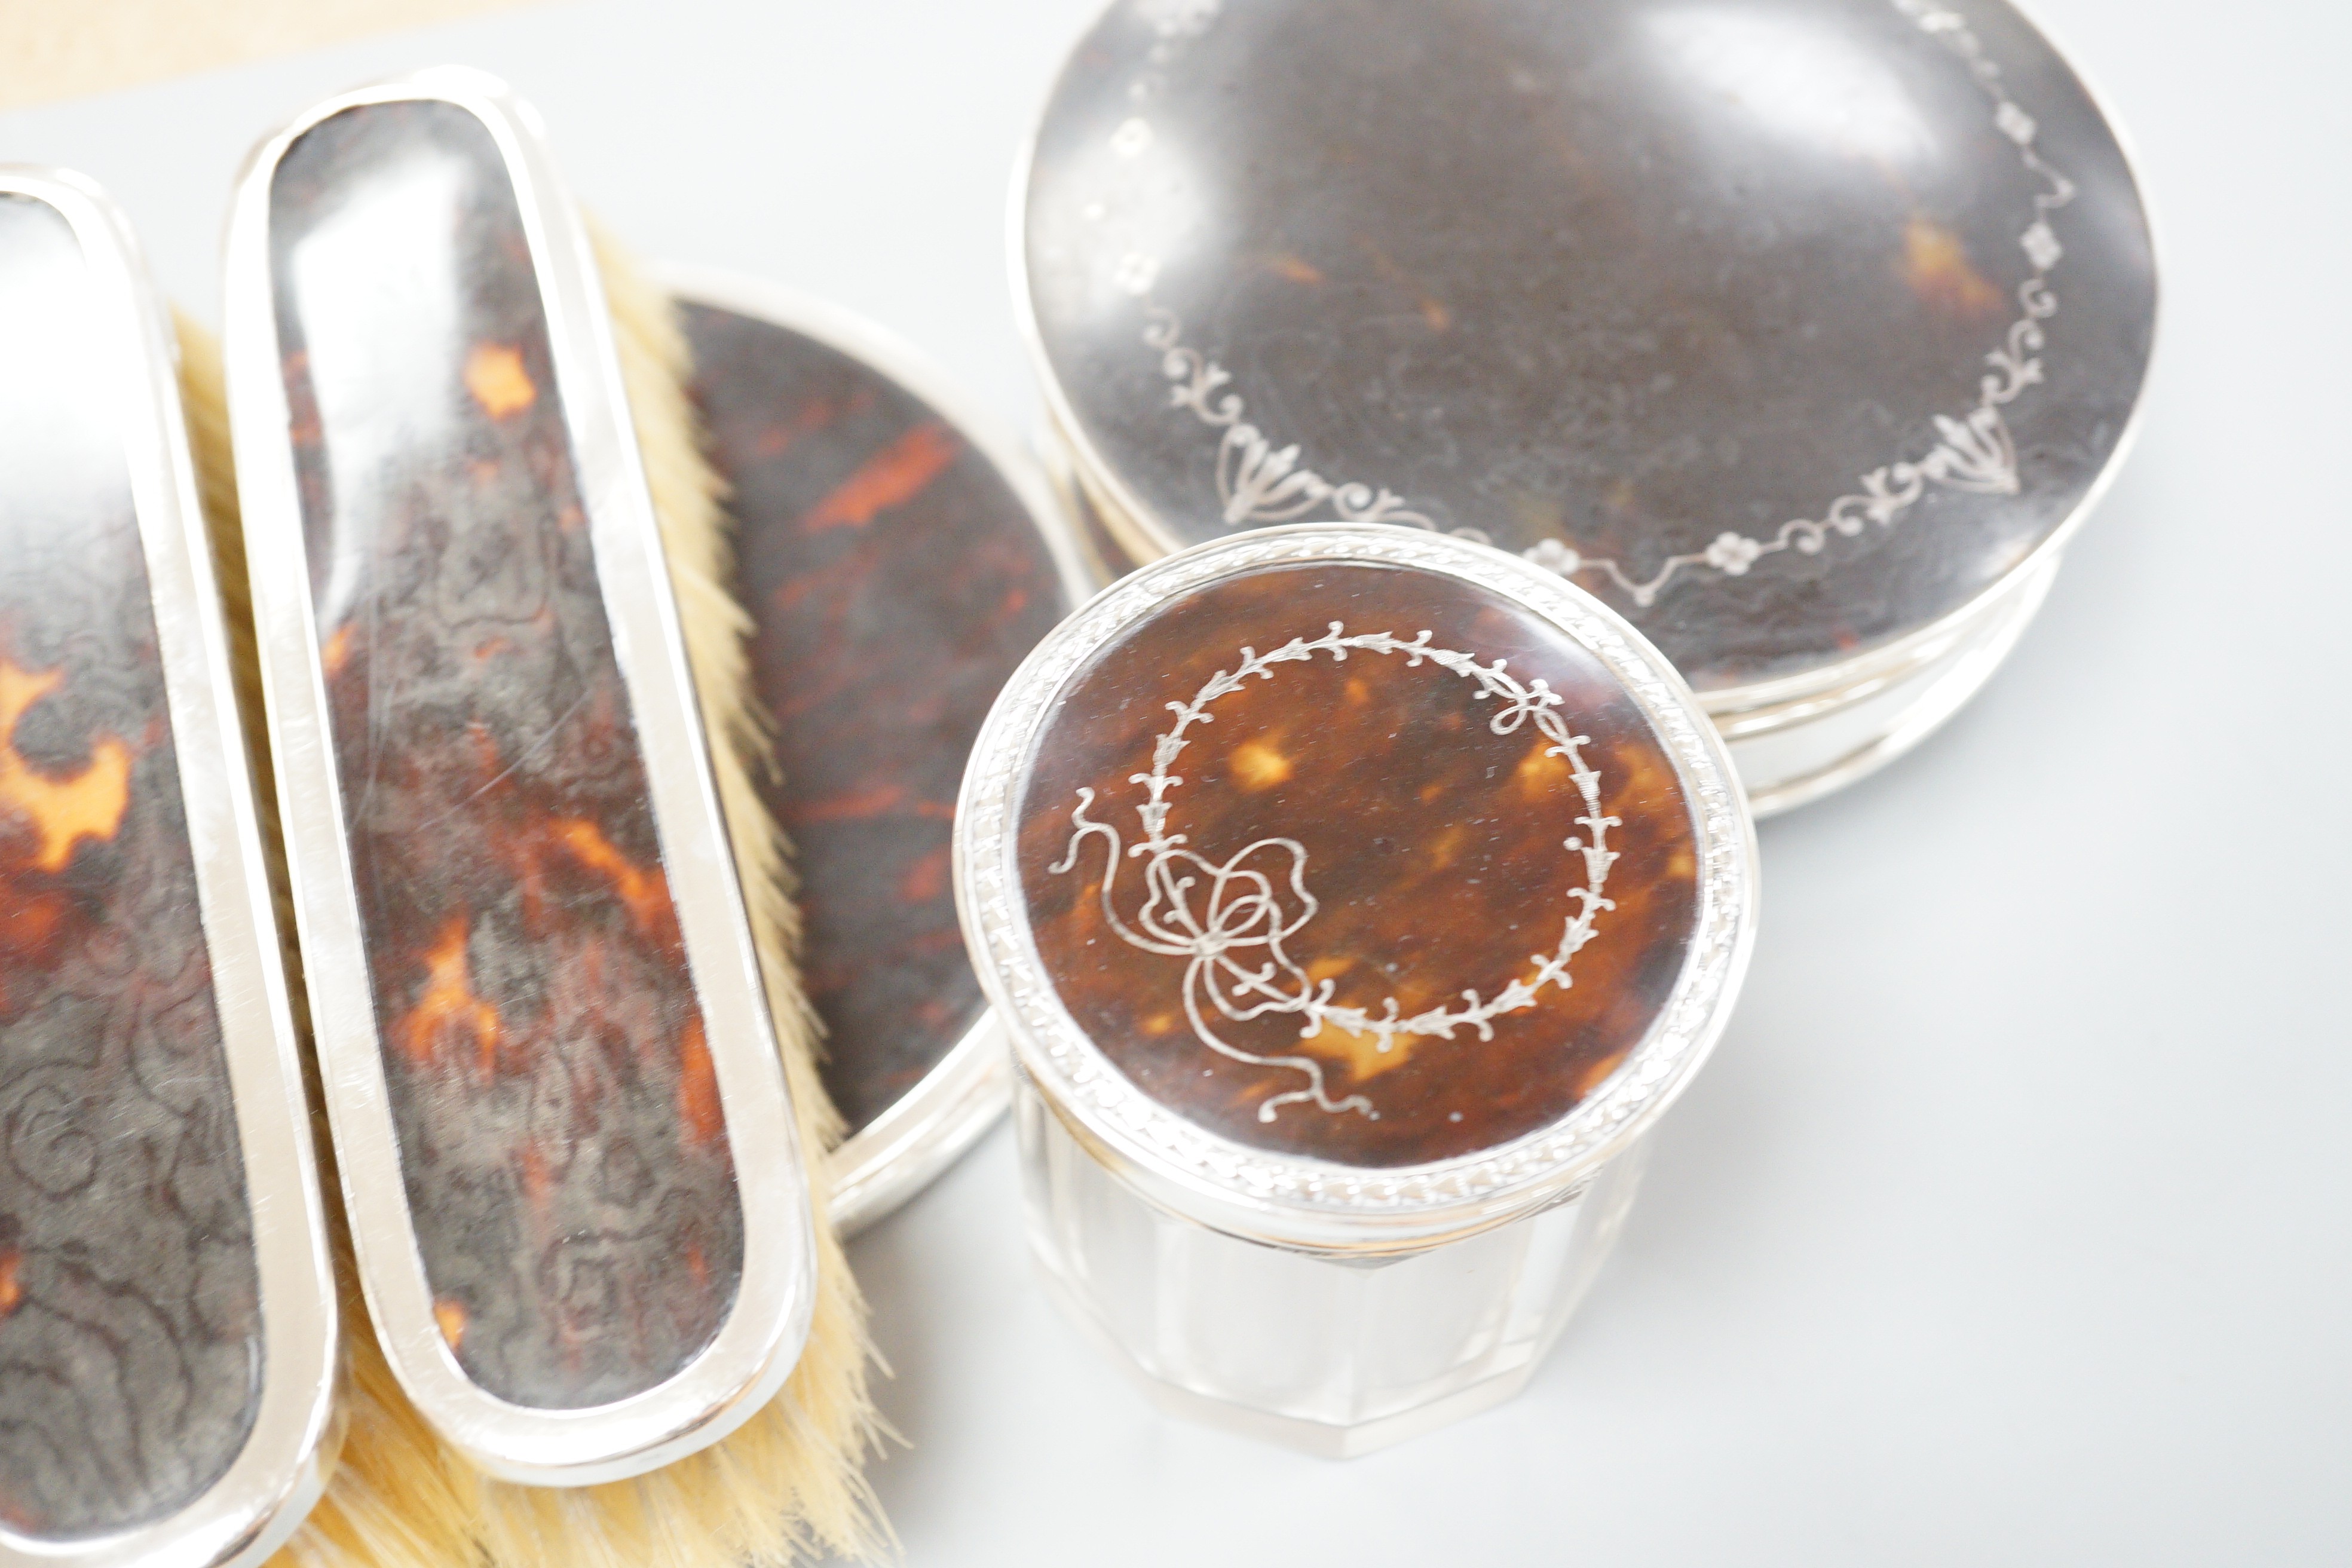 A George V matched silver and tortoiseshell mounted five piece mirror and brush set, a George V silver and tortoiseshell pique mounted circular box with mirrored interior and a similar mounted glass toilet jar.